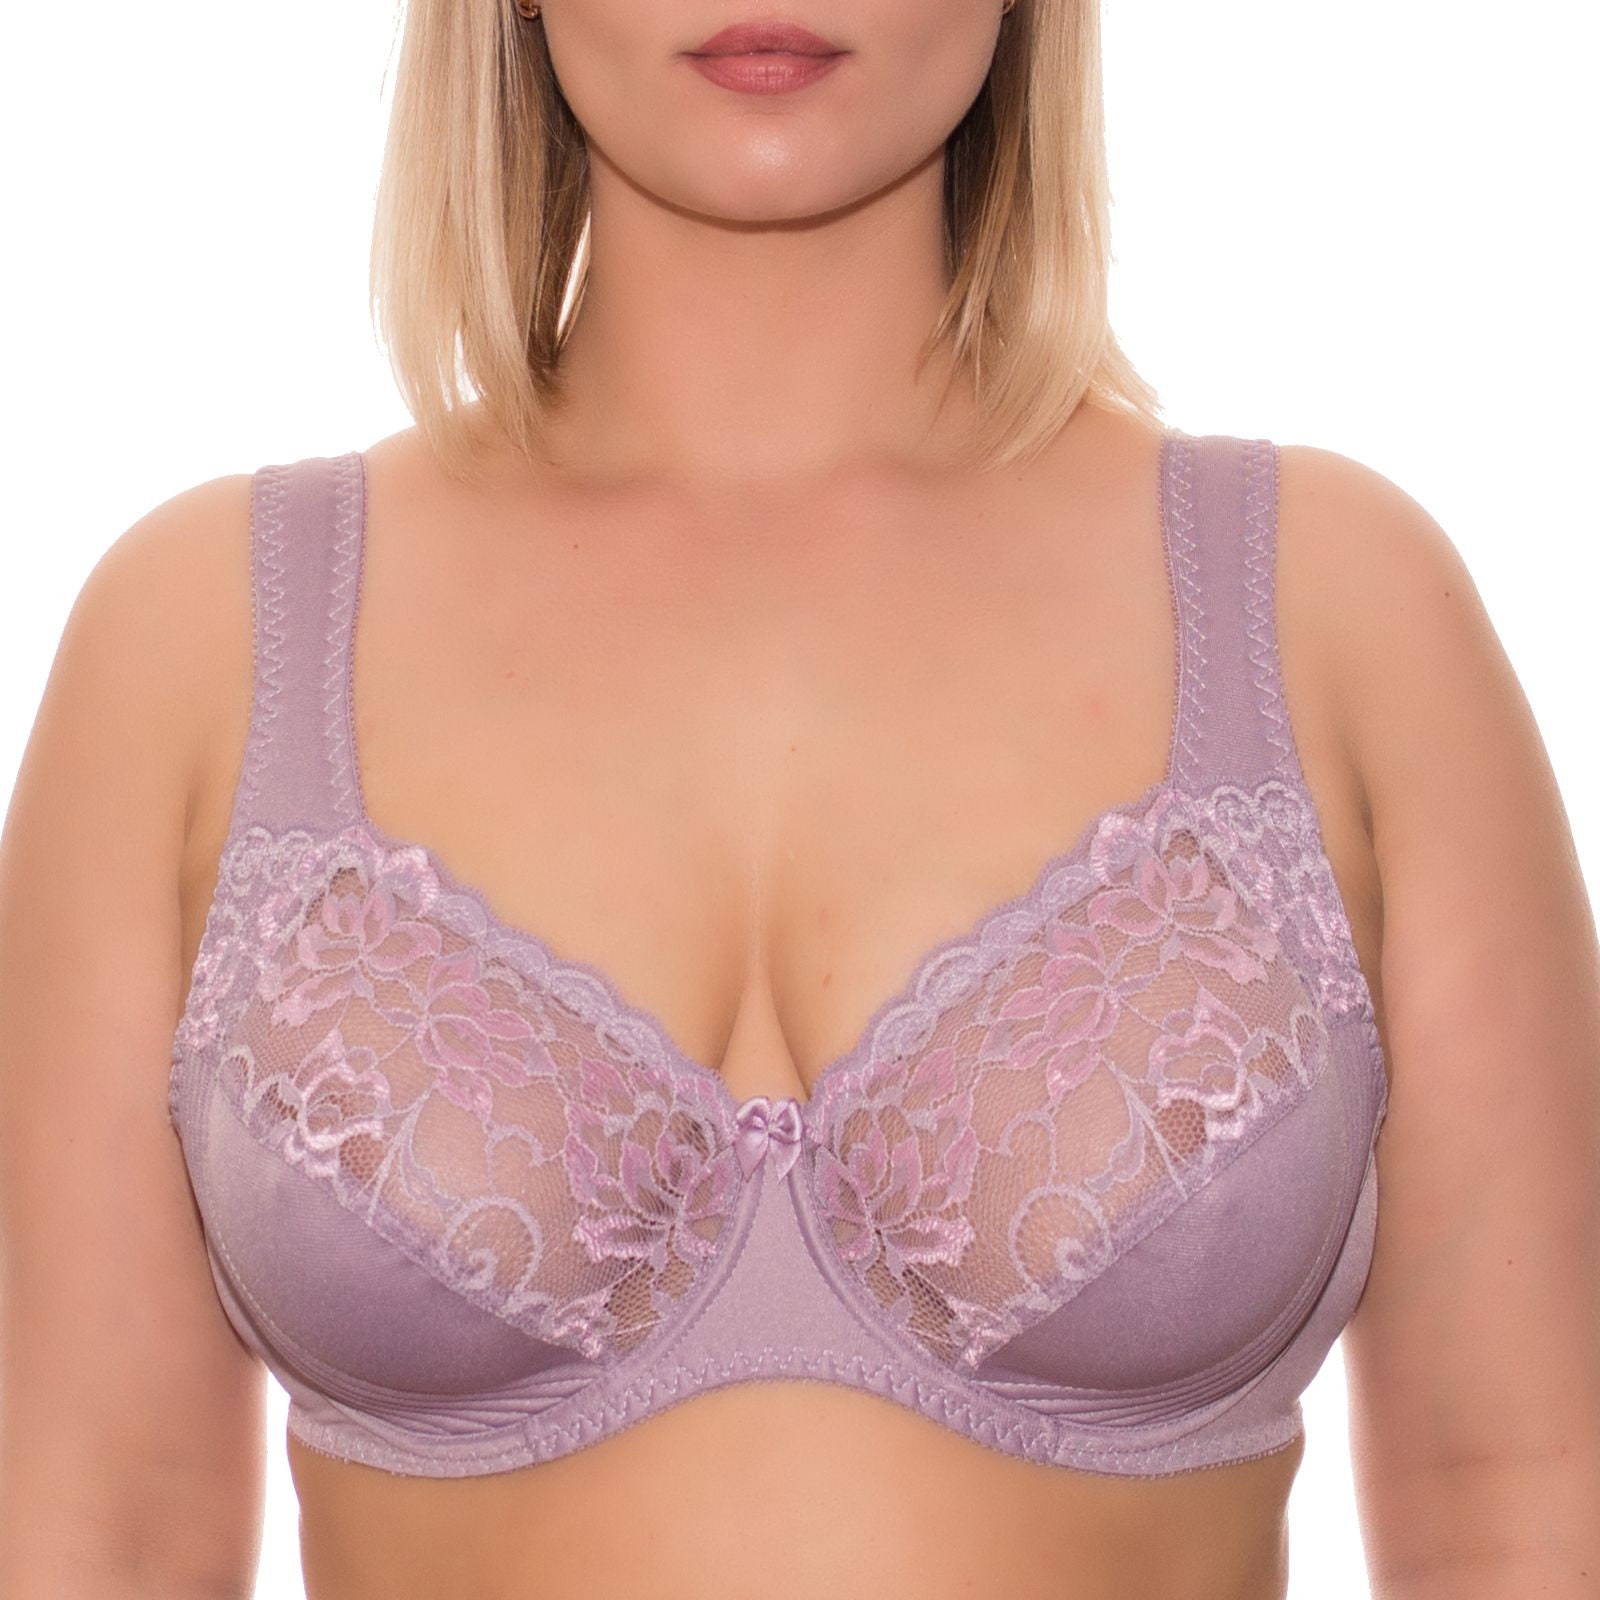  Minimizer Bras For Women Full Coverage Underwire Bras For  Heavy Breast 42G Pastel Blue